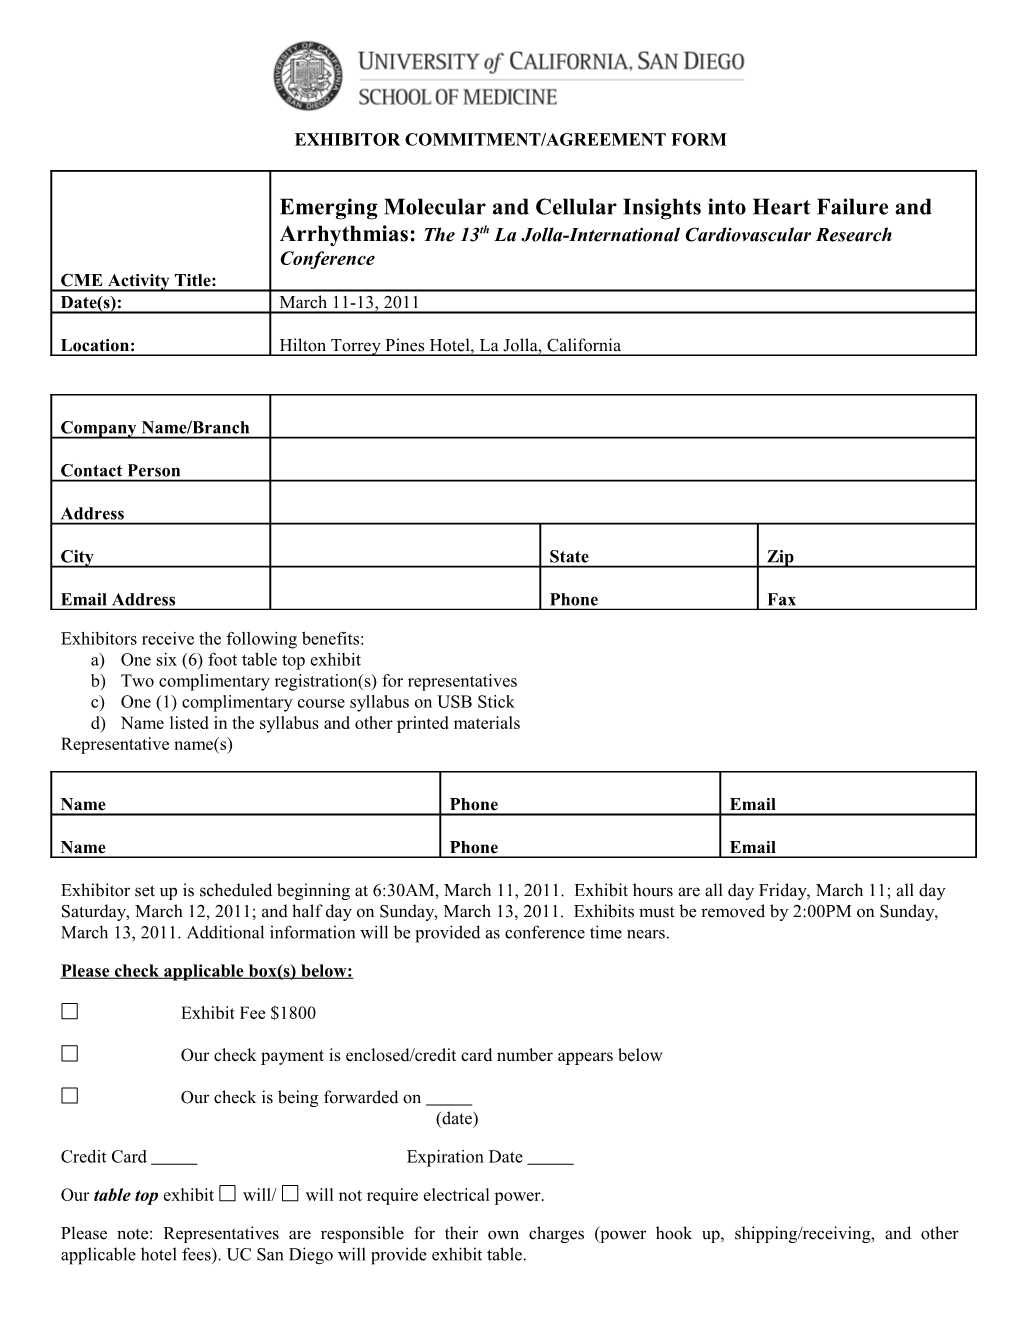 Exhibitor Commitment/Agreement Form